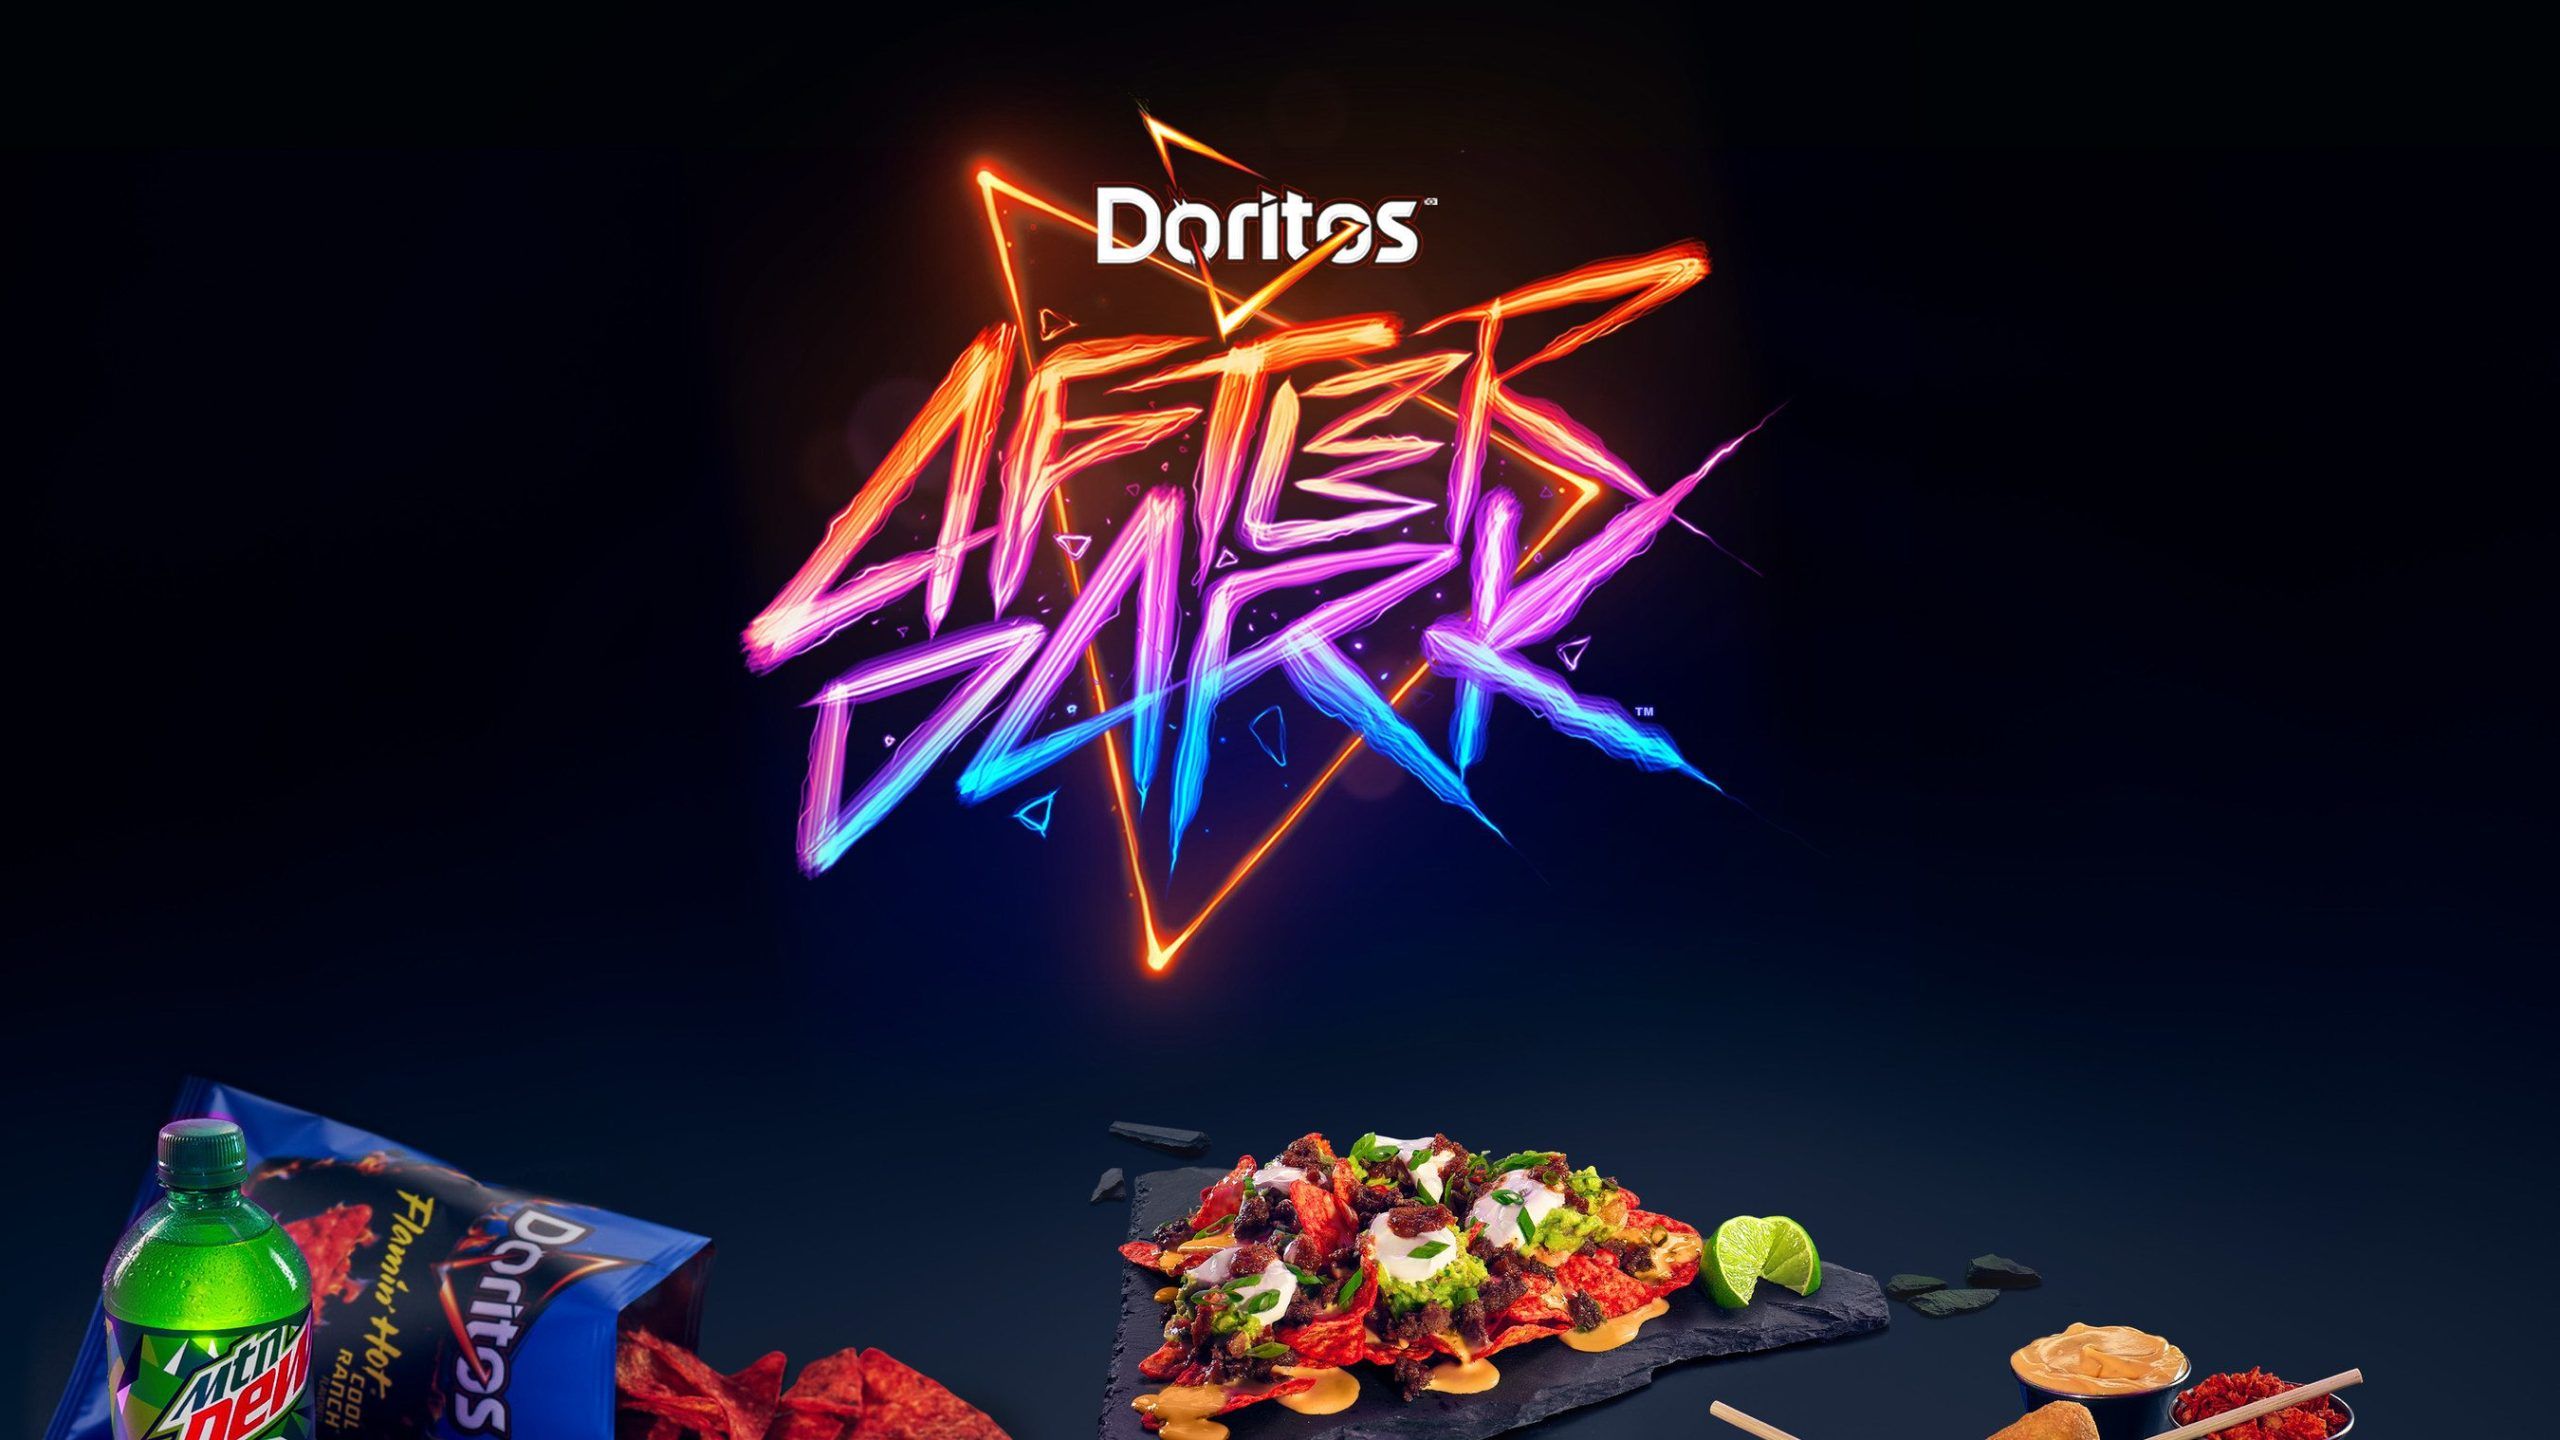 A neon sign for Doritos After Dark with a plate of nachos in the foreground. - Doritos